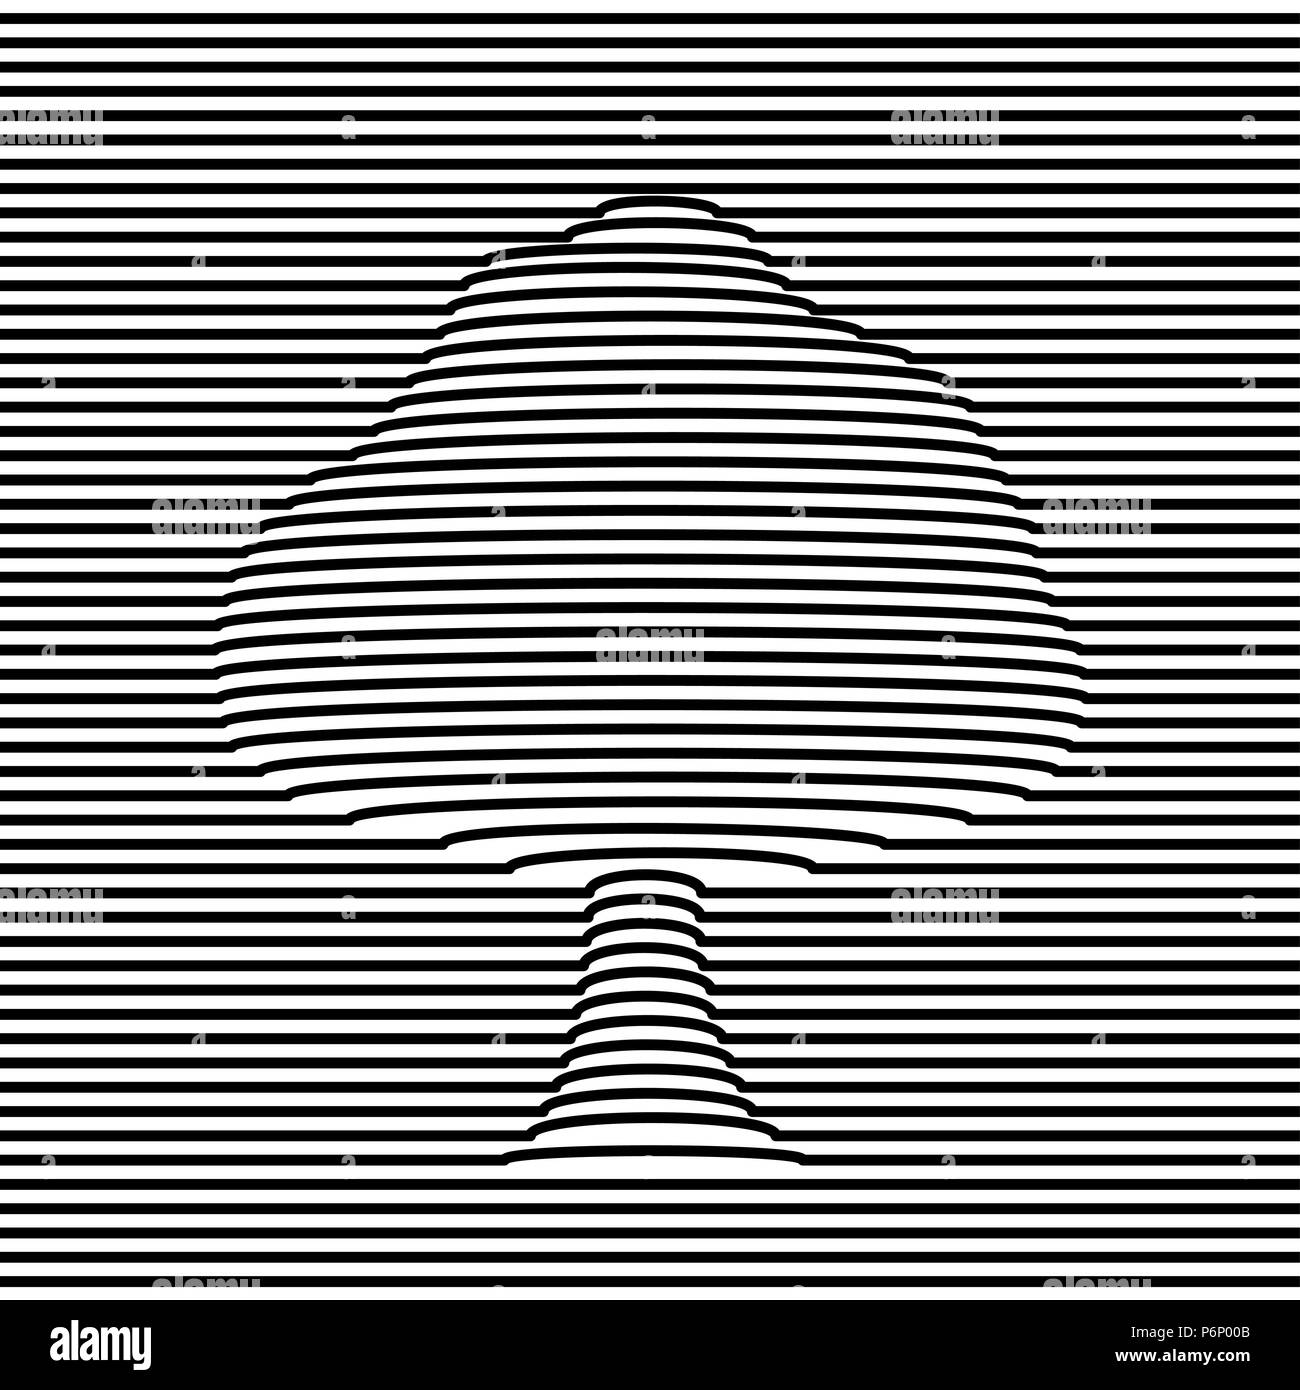 Tree shape optic illusion illustration in black and white. 3d volume effect abstract design. EPS10 vector. Stock Vector